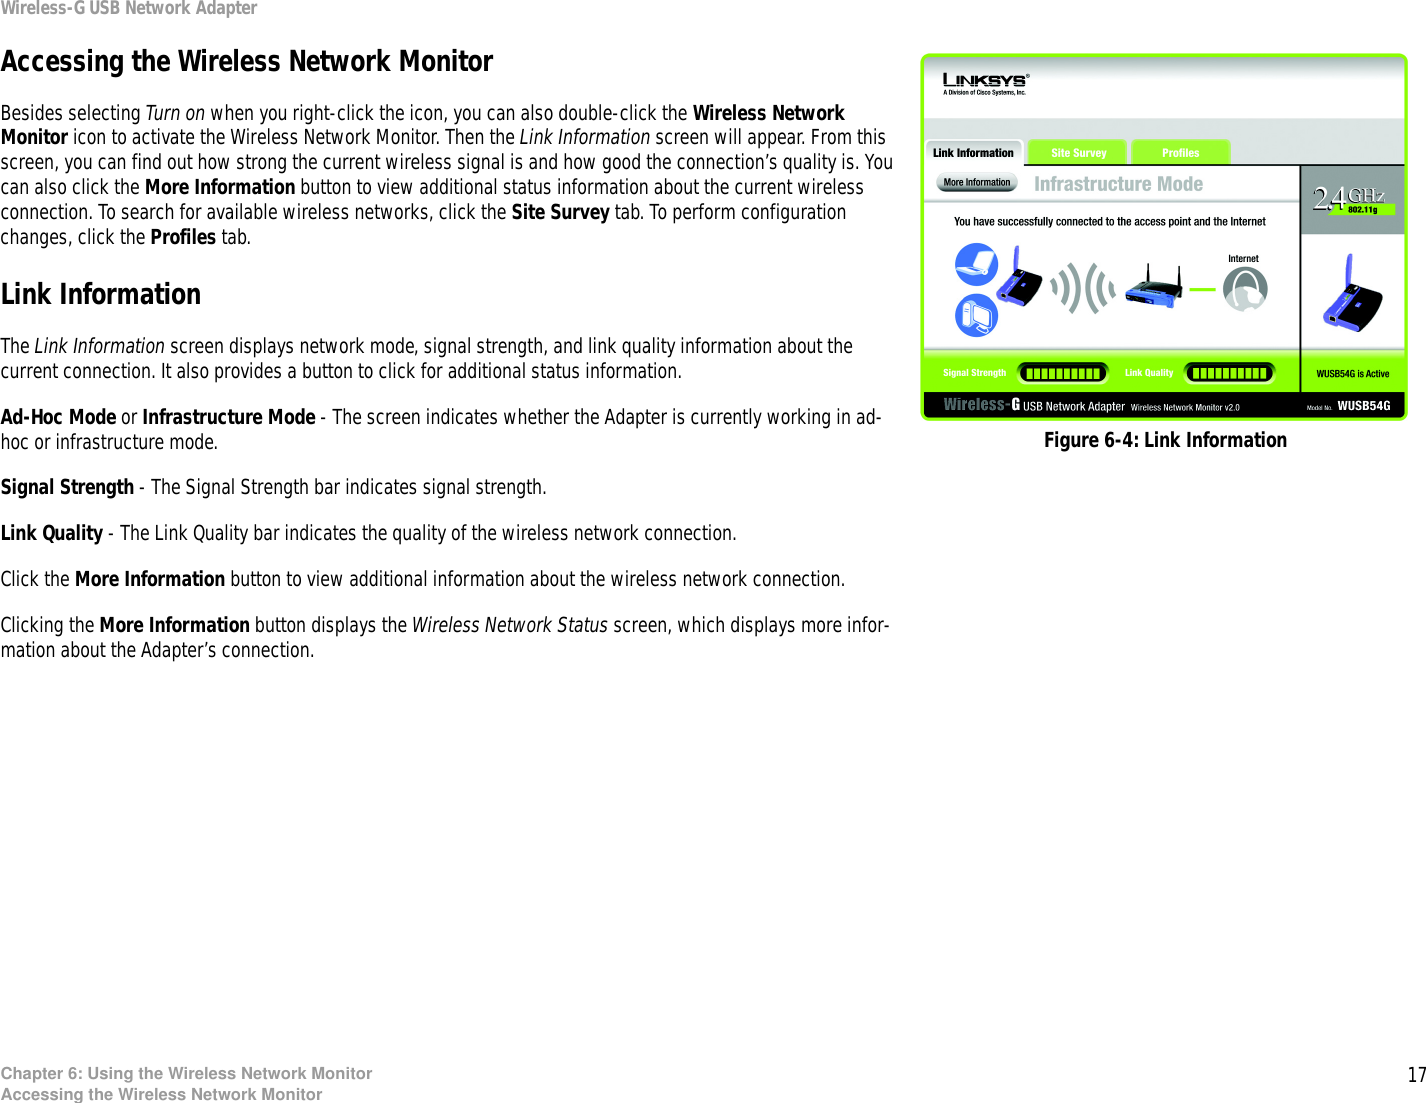 17Chapter 6: Using the Wireless Network MonitorAccessing the Wireless Network MonitorWireless-G USB Network AdapterAccessing the Wireless Network MonitorBesides selecting Turn on when you right-click the icon, you can also double-click the Wireless Network Monitor icon to activate the Wireless Network Monitor. Then the Link Information screen will appear. From this screen, you can find out how strong the current wireless signal is and how good the connection’s quality is. You can also click the More Information button to view additional status information about the current wireless connection. To search for available wireless networks, click the Site Survey tab. To perform configuration changes, click the Profiles tab.Link InformationThe Link Information screen displays network mode, signal strength, and link quality information about the current connection. It also provides a button to click for additional status information.Ad-Hoc Mode or Infrastructure Mode - The screen indicates whether the Adapter is currently working in ad-hoc or infrastructure mode.Signal Strength - The Signal Strength bar indicates signal strength. Link Quality - The Link Quality bar indicates the quality of the wireless network connection.Click the More Information button to view additional information about the wireless network connection. Clicking the More Information button displays the Wireless Network Status screen, which displays more infor-mation about the Adapter’s connection.Figure 6-4: Link Information